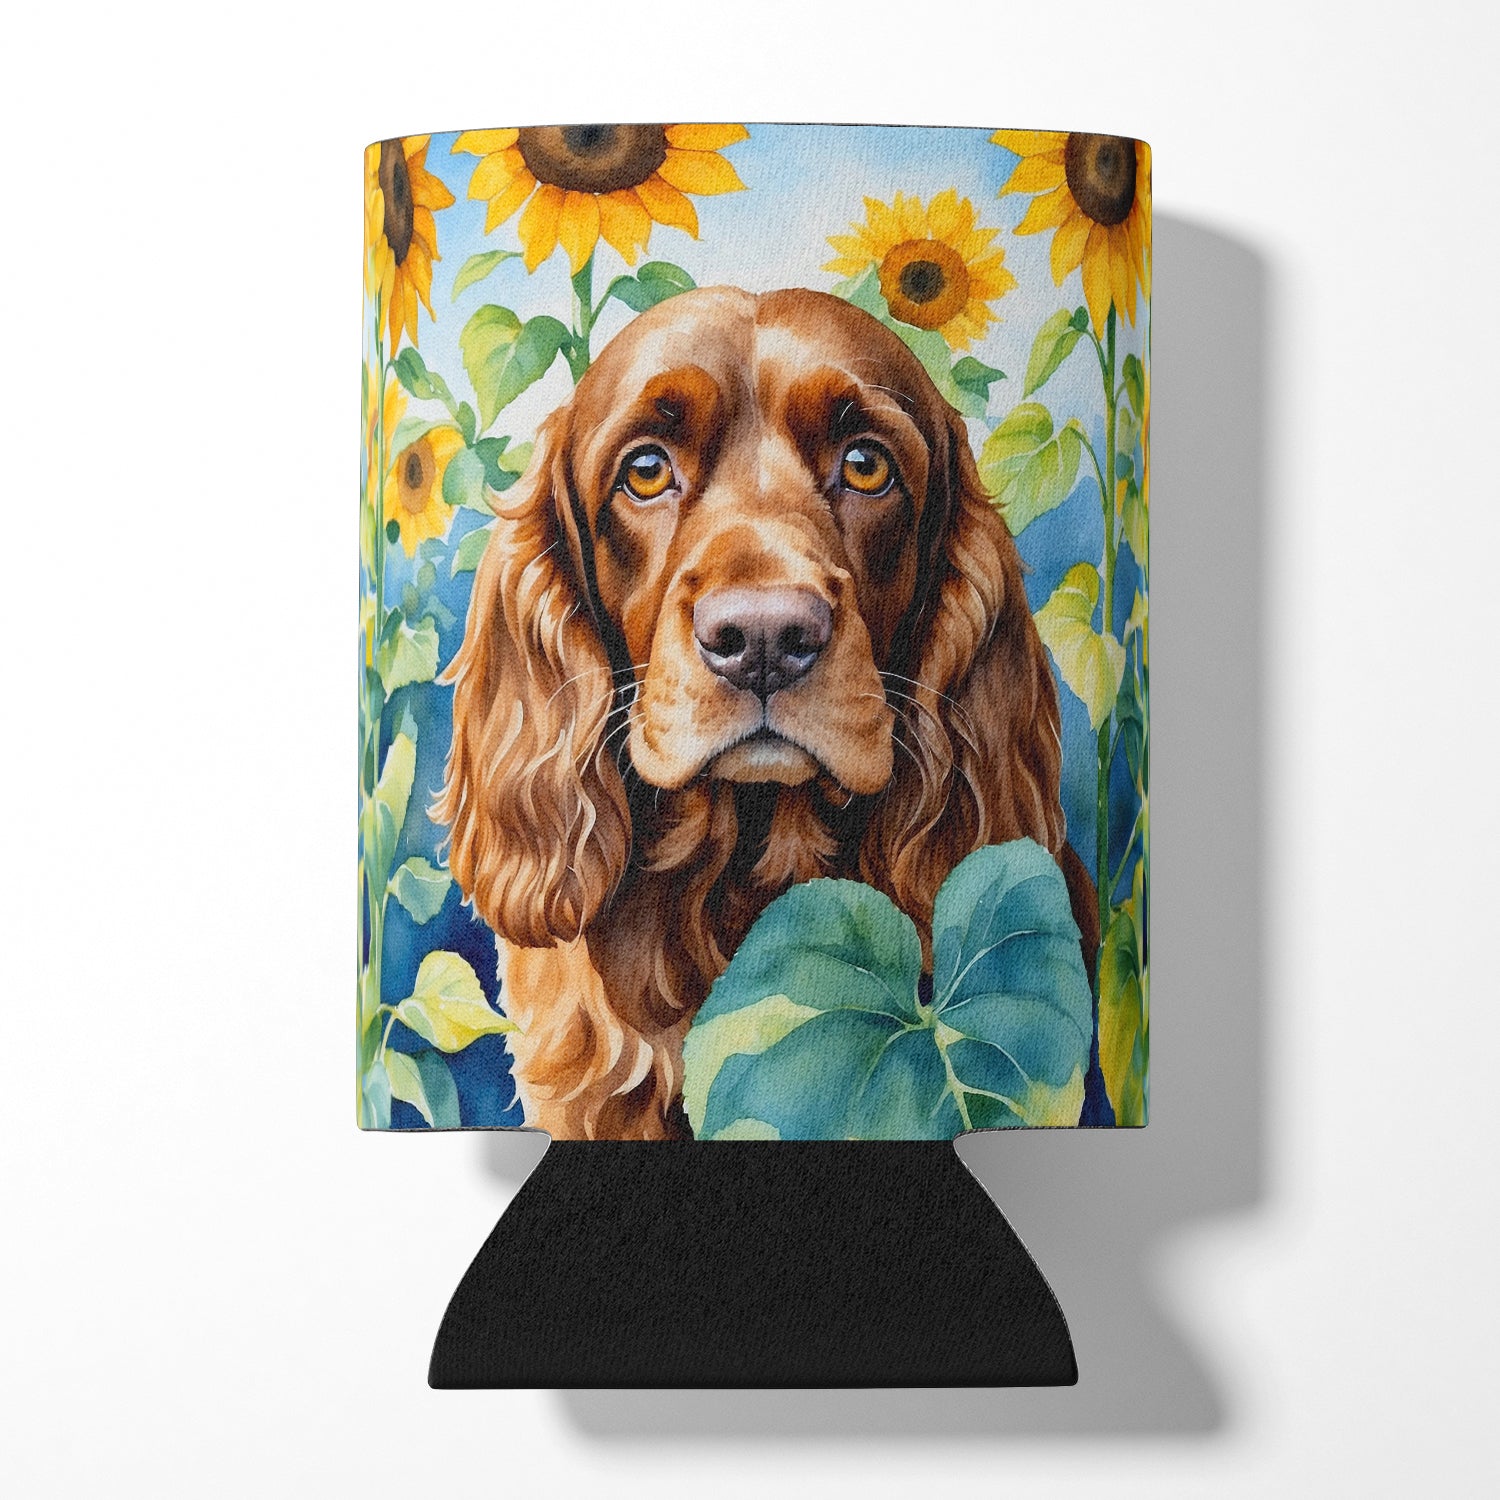 Buy this English Cocker Spaniel in Sunflowers Can or Bottle Hugger